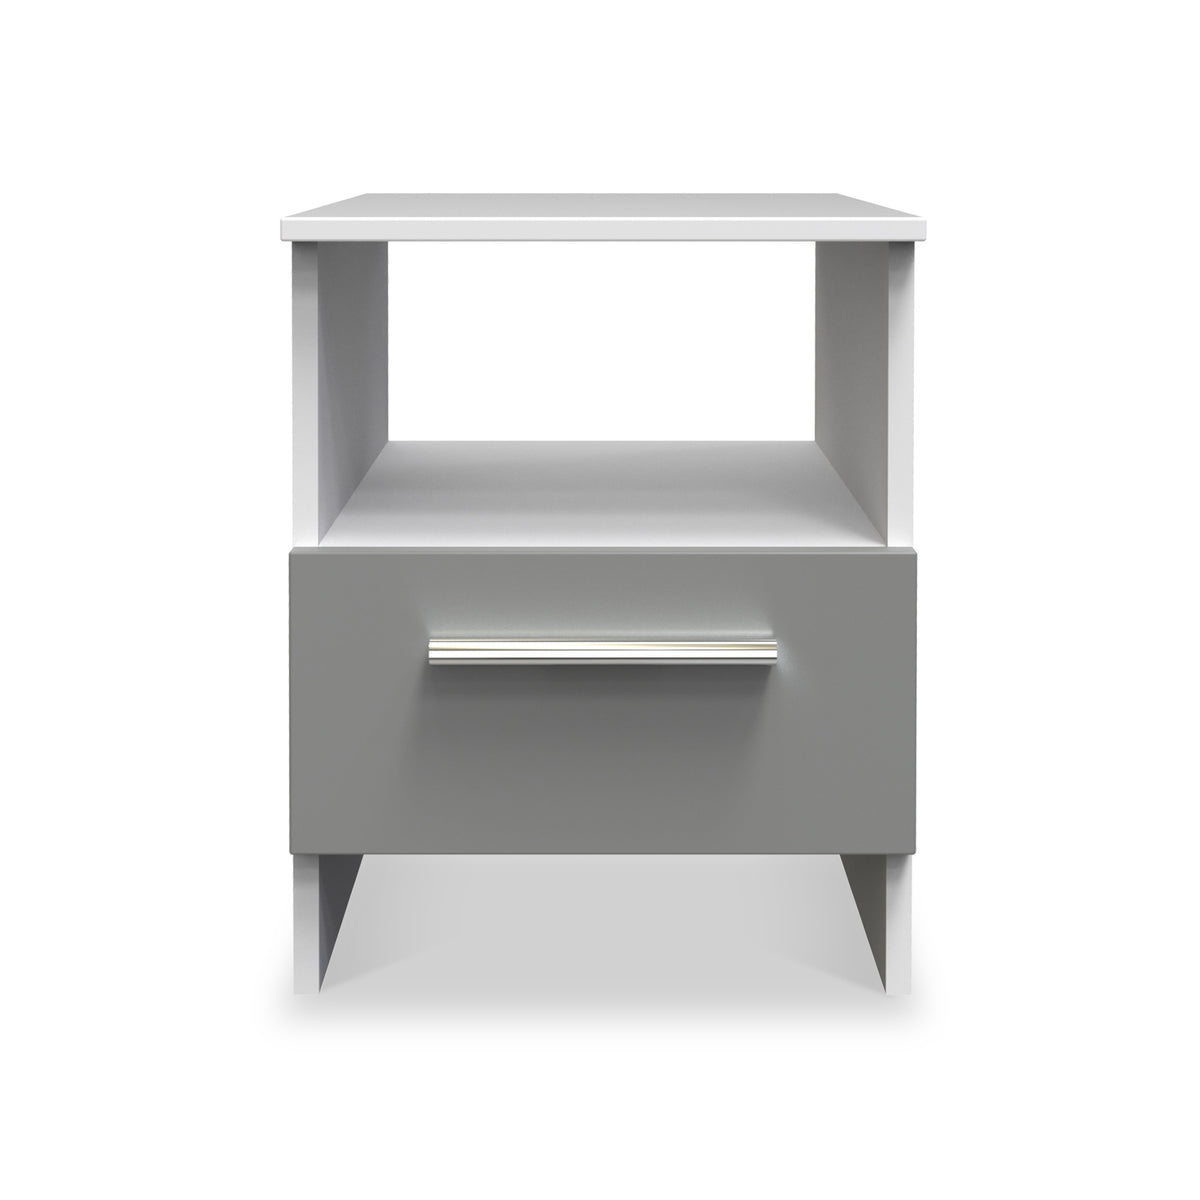 Blakely Grey and White 1 Drawer Lamp Bedside Table from Roseland Furniture